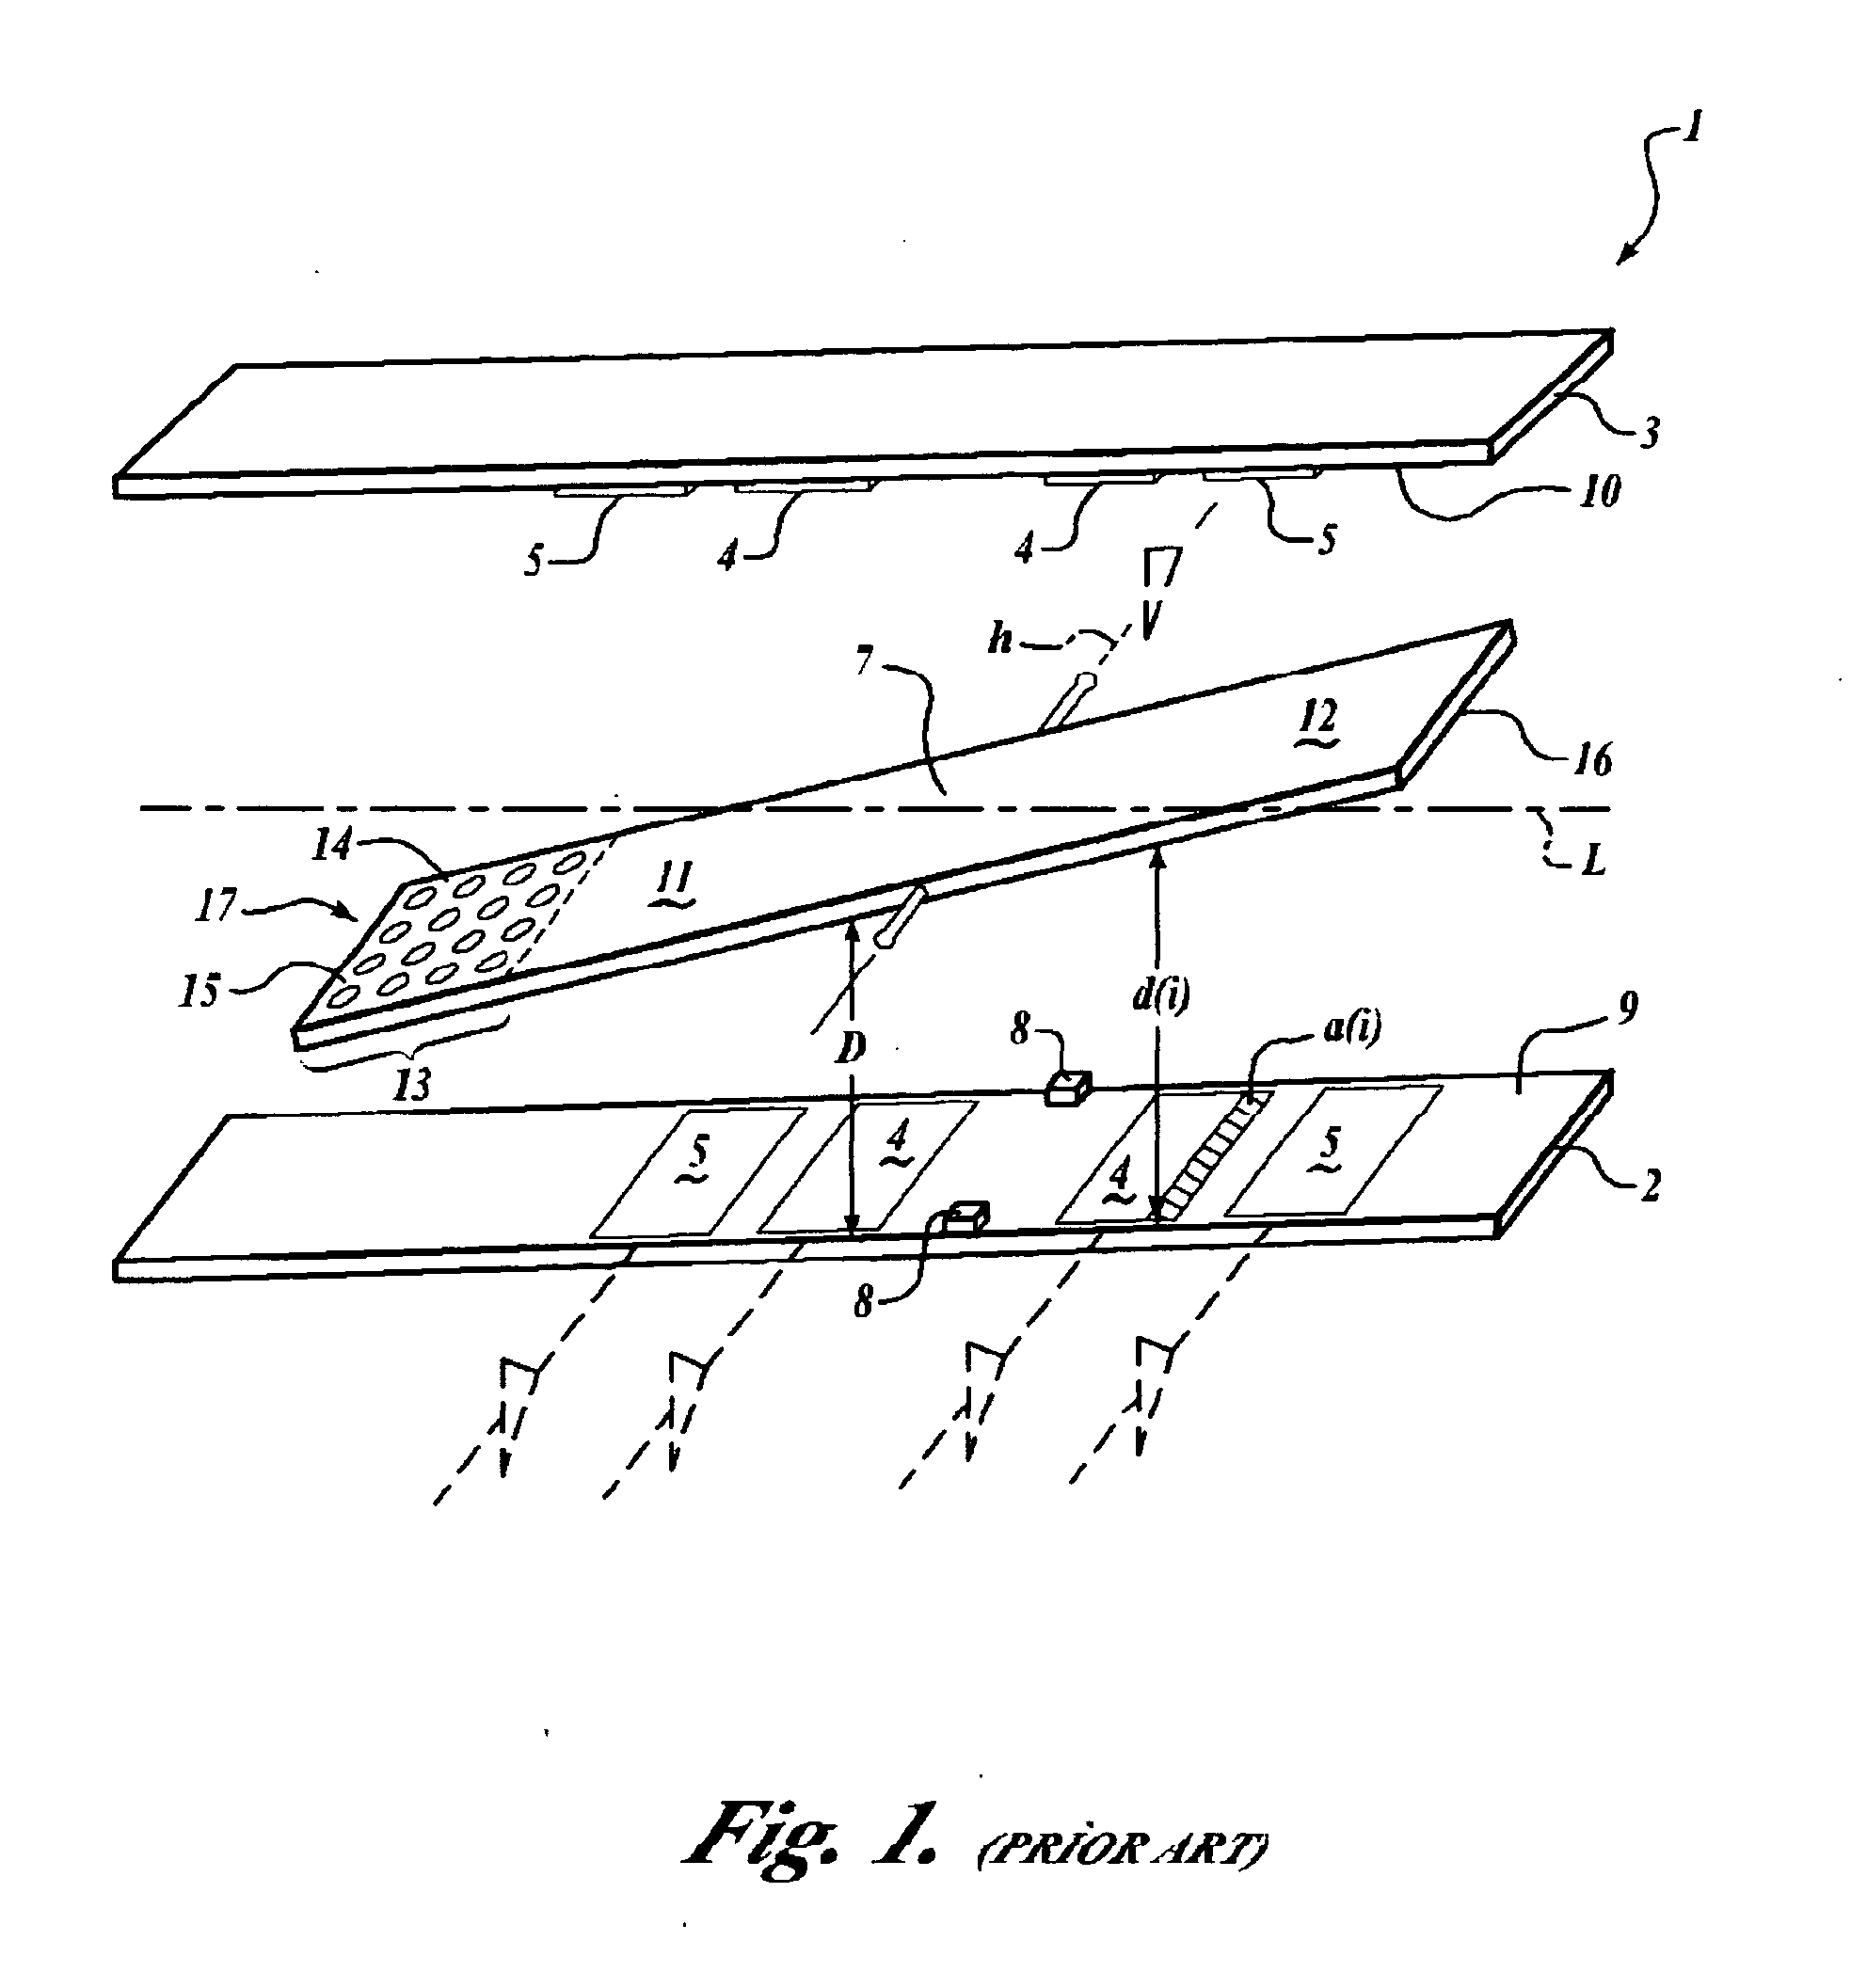 Capacitive pick-off and electrostatic rebalance accelerometer having equalized gas damping